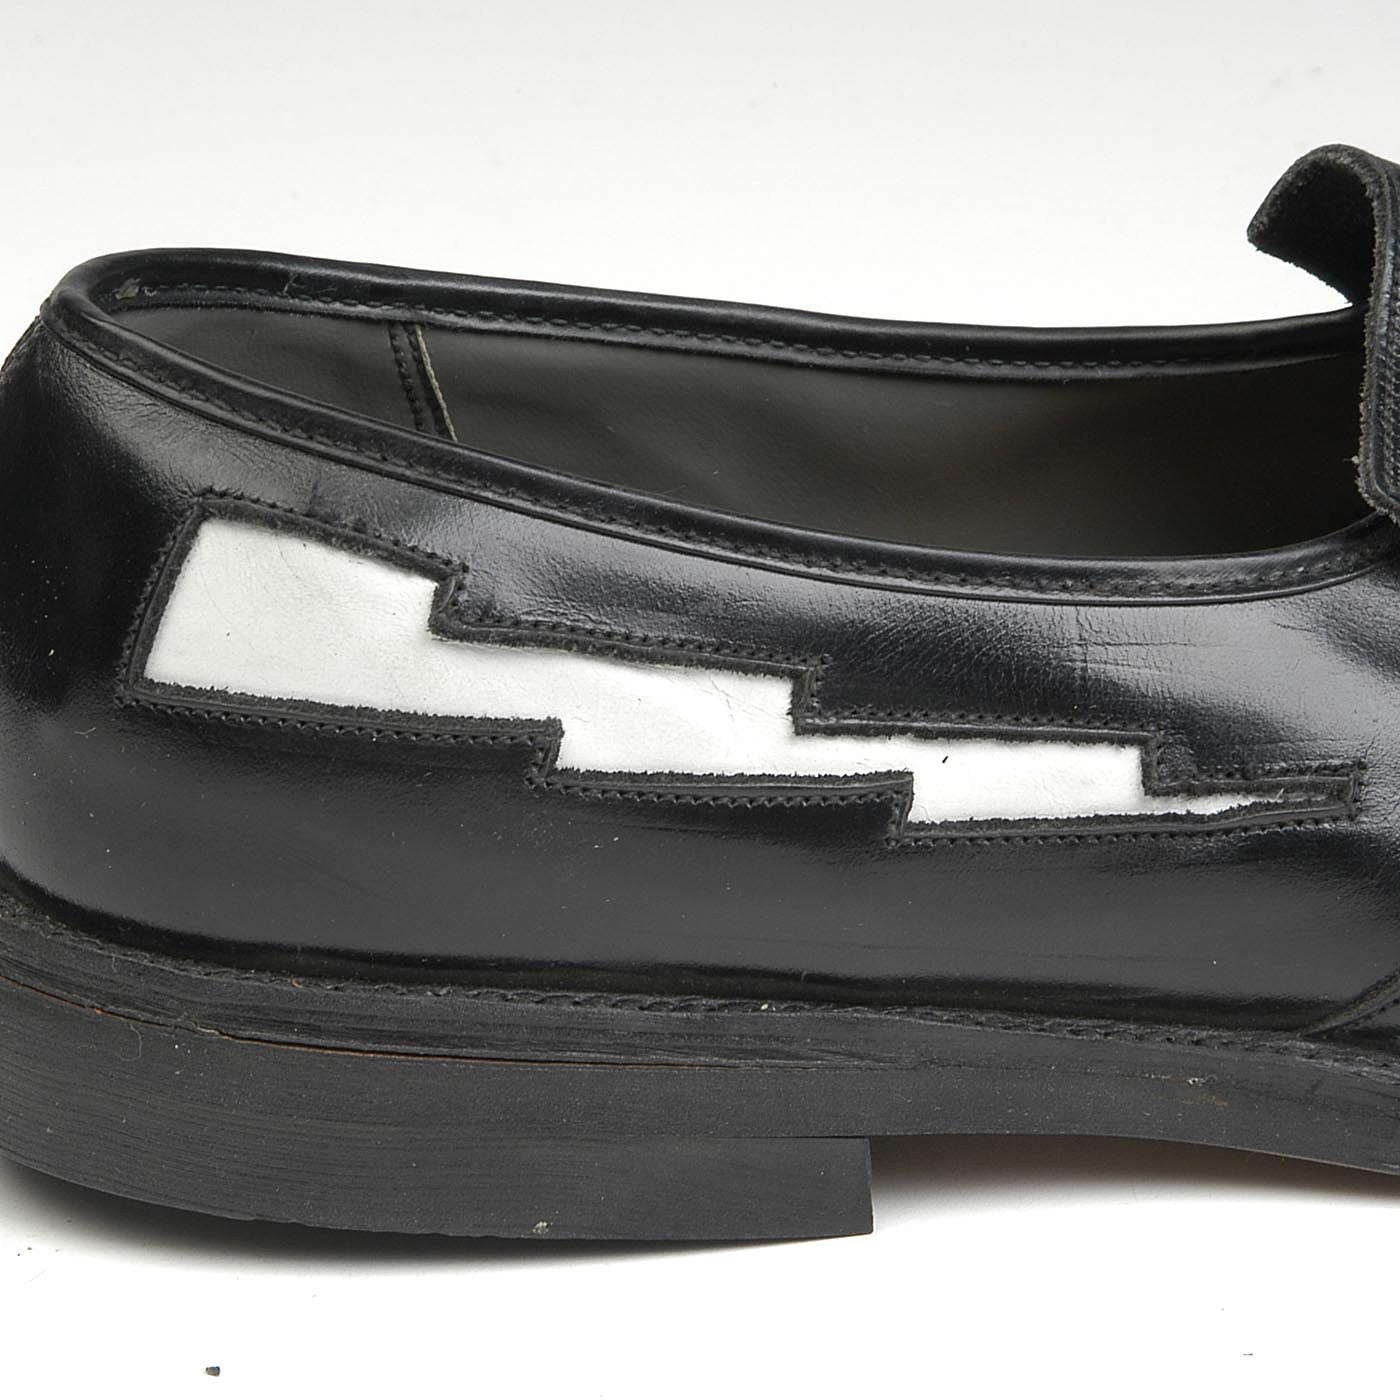 sz 11 Deadstock 1950s Men's Rockabilly Loafers with White Lightning Bolts